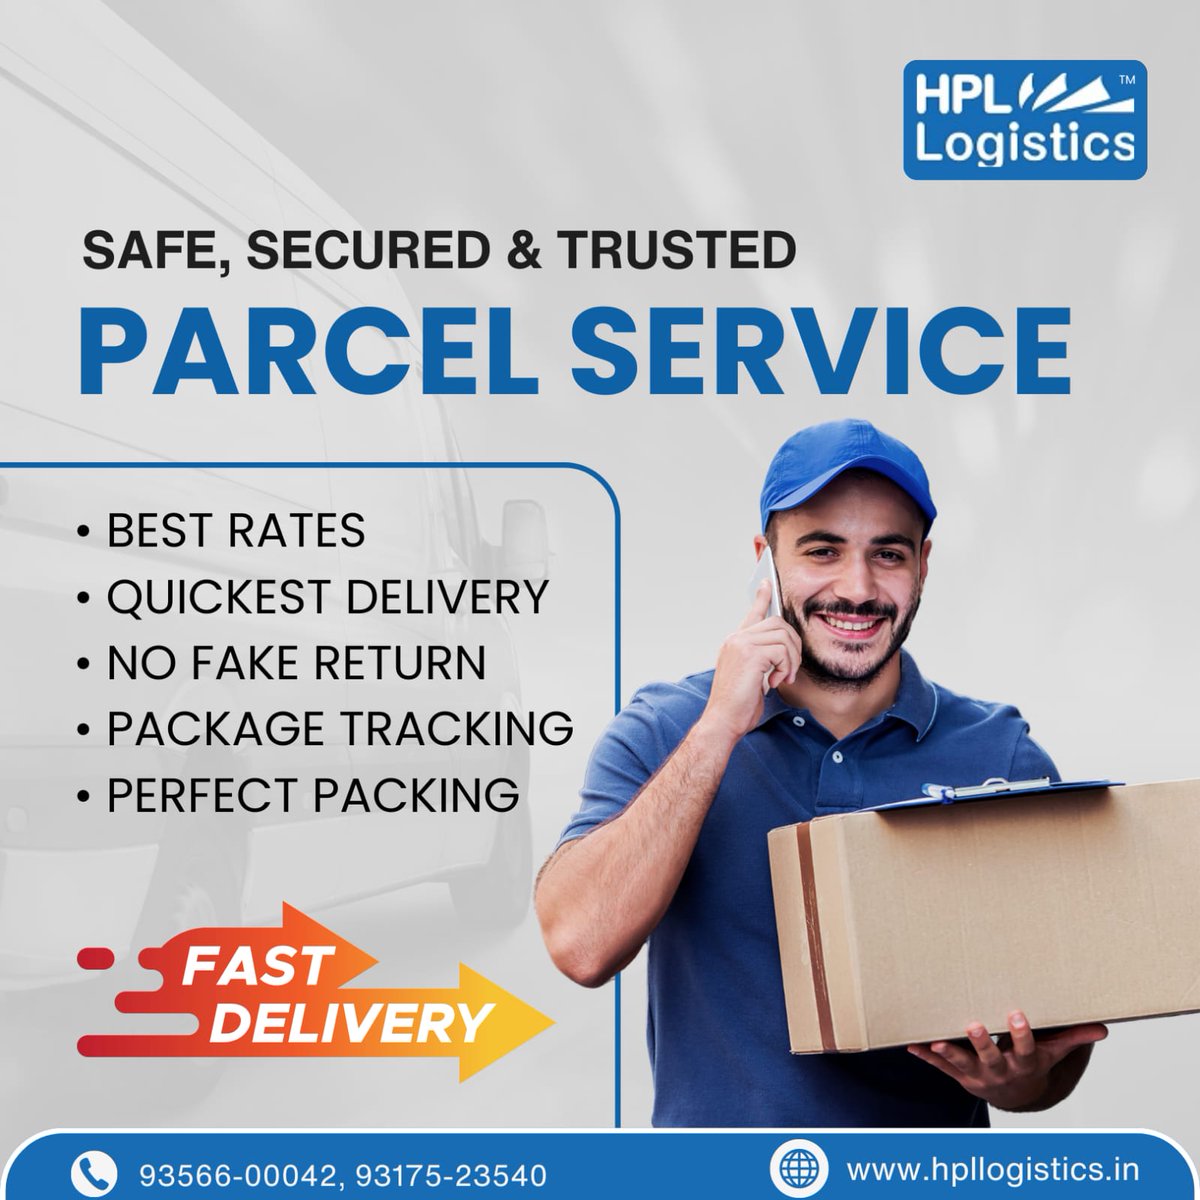 Your parcels, our promise. With HPL Logistics, safety and security come standard. Ship with confidence. 📦🔒
.
hpllogistics.in
.
.
Tags
#BestInternationalcourier #bestservices #TimeSaver #courier #FreightManagement #GlobalShipping #Logistics #Ludhiana #LudhianaPunjab